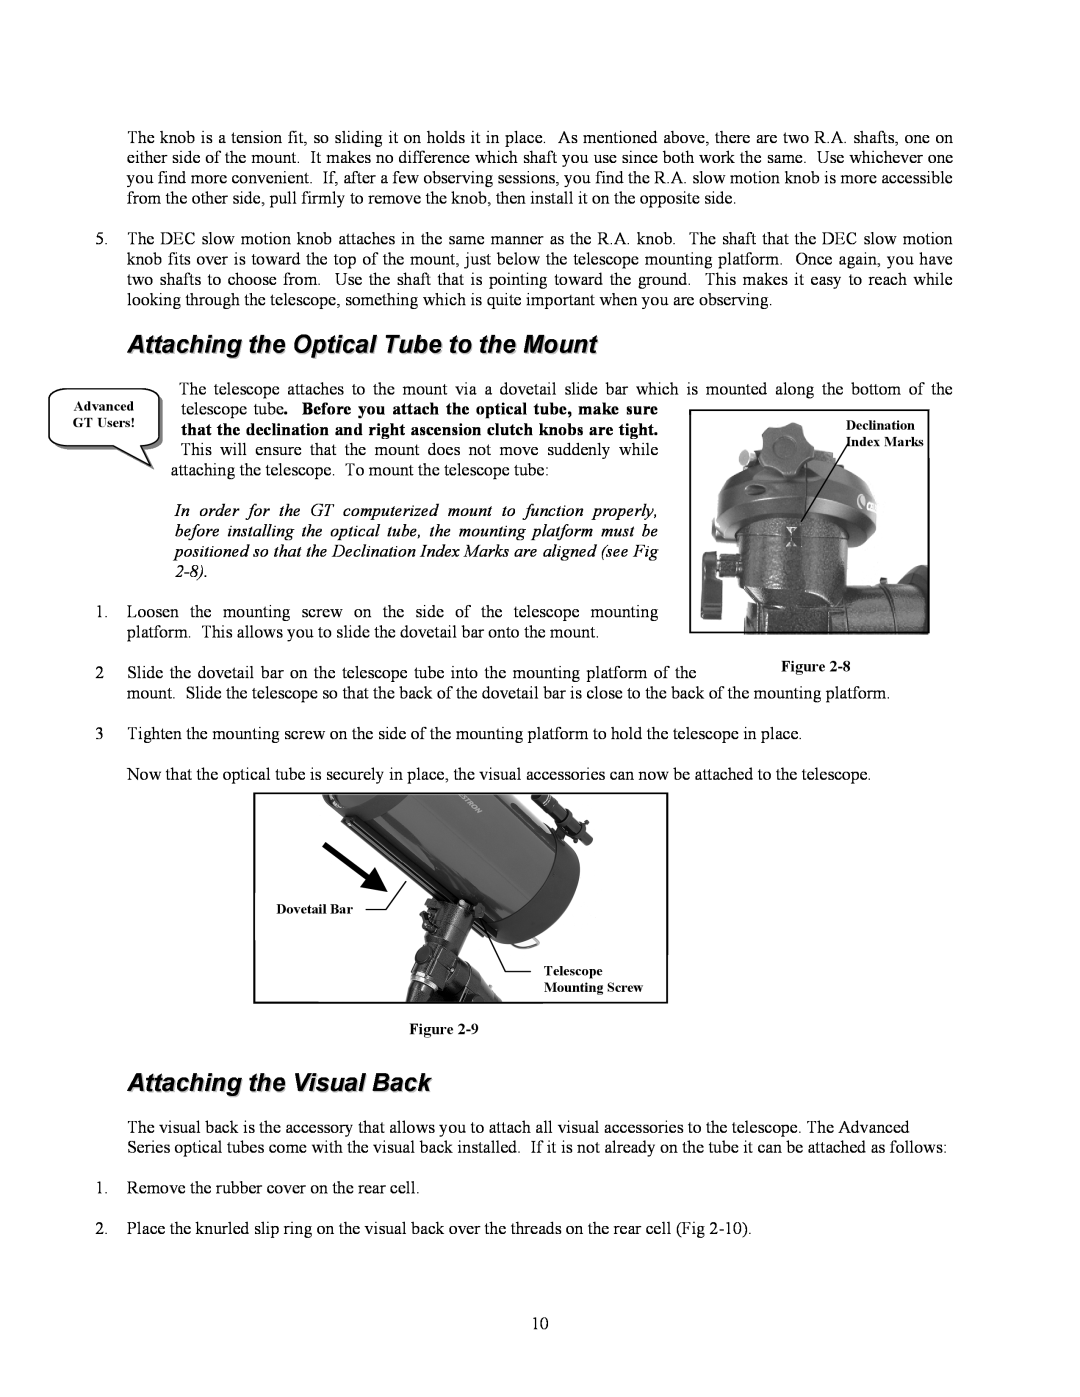 Celestron C9-S, C8-S, C5-S instruction manual Attaching the Optical Tube to the Mount, Attaching the Visual Back 